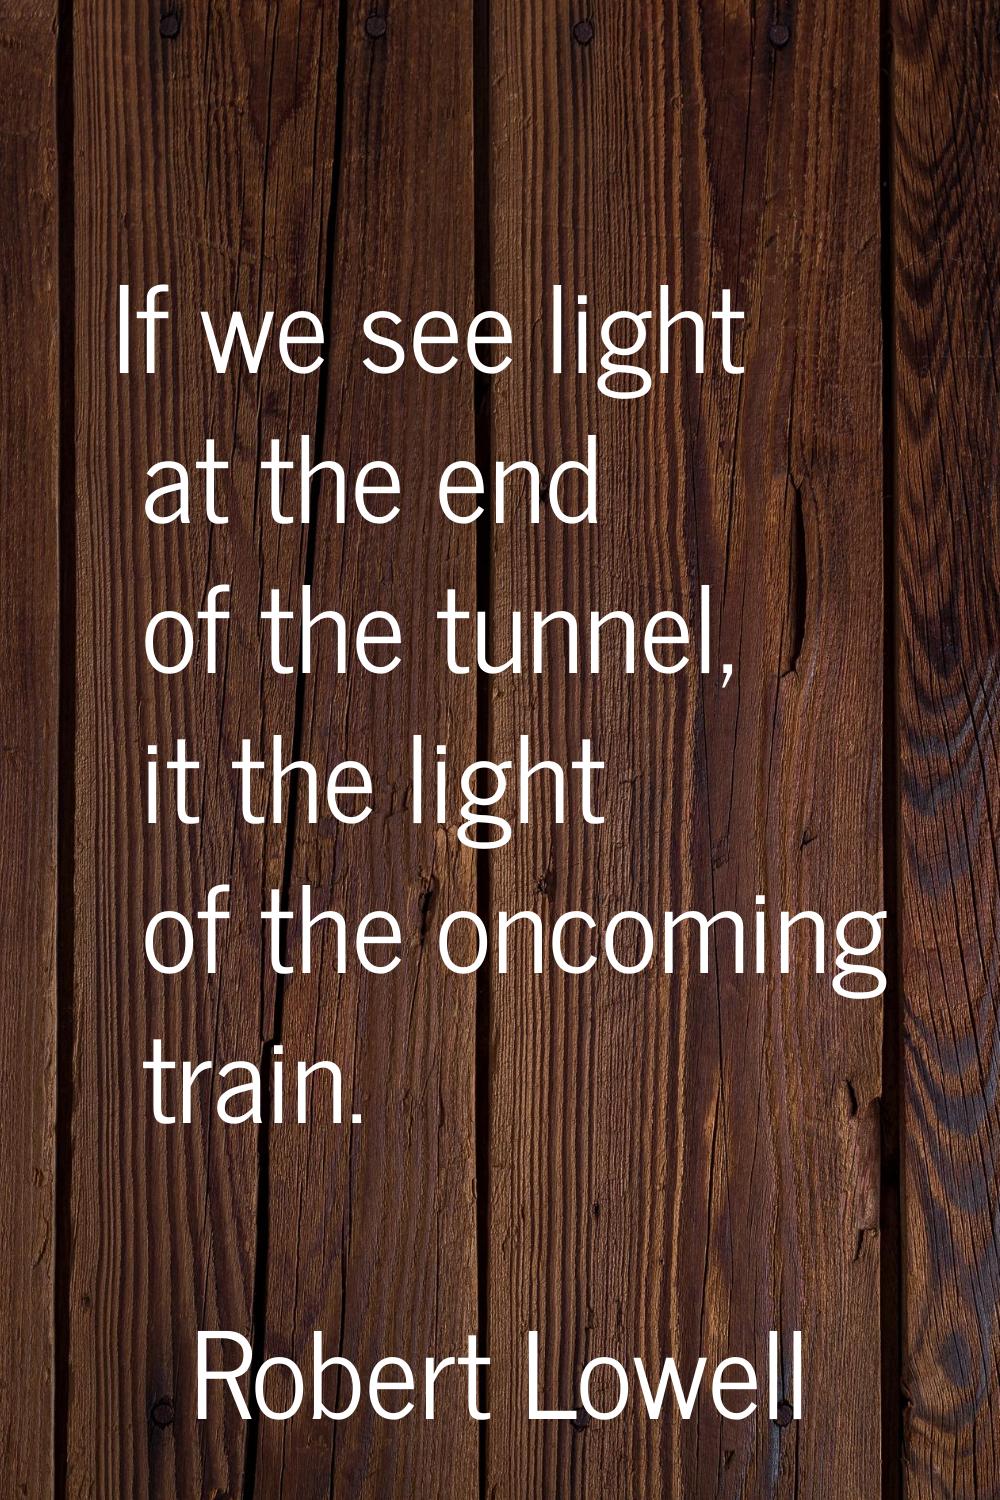 If we see light at the end of the tunnel, it the light of the oncoming train.